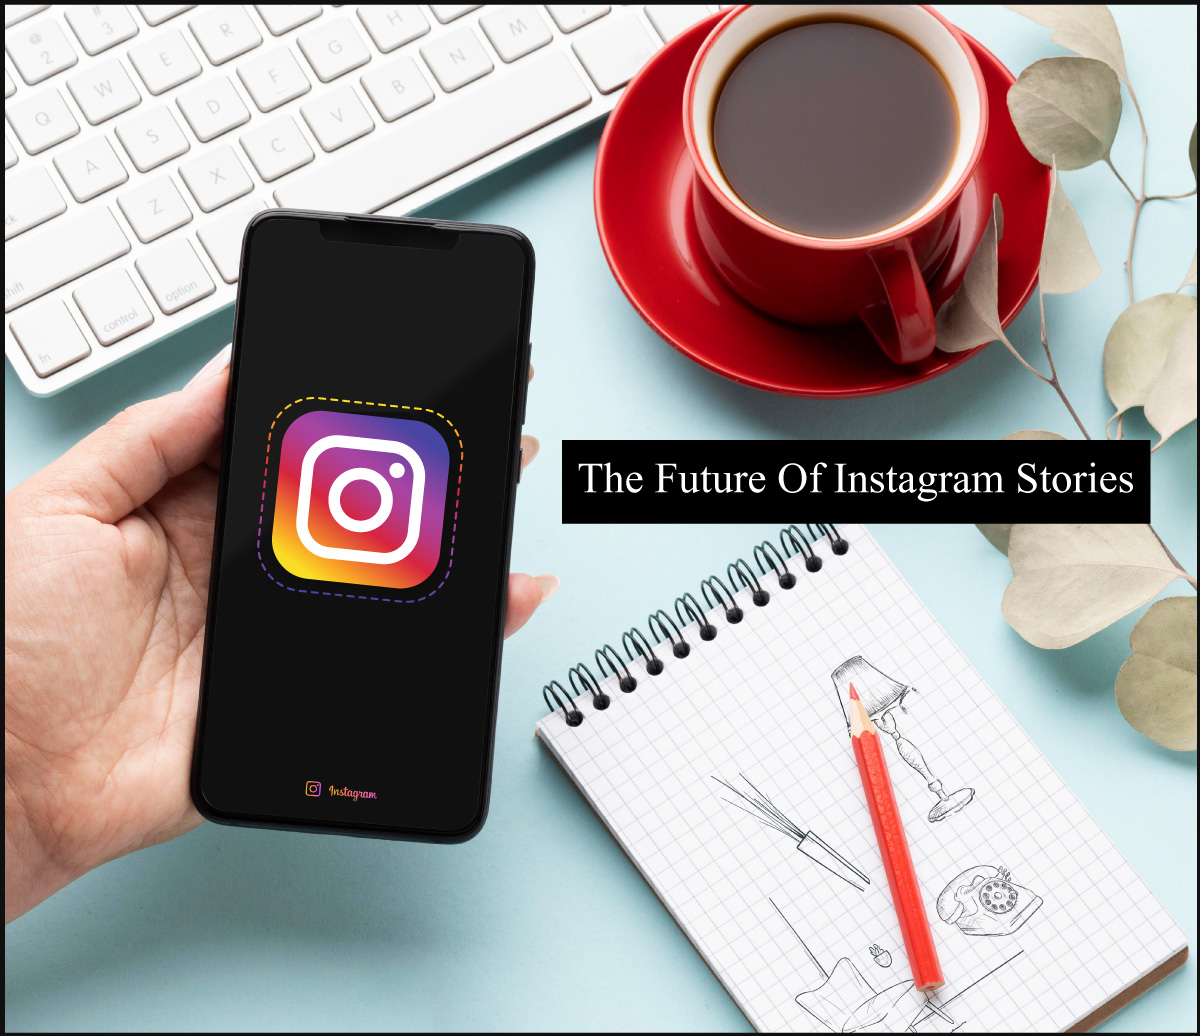 The Future Of Instagram Stories